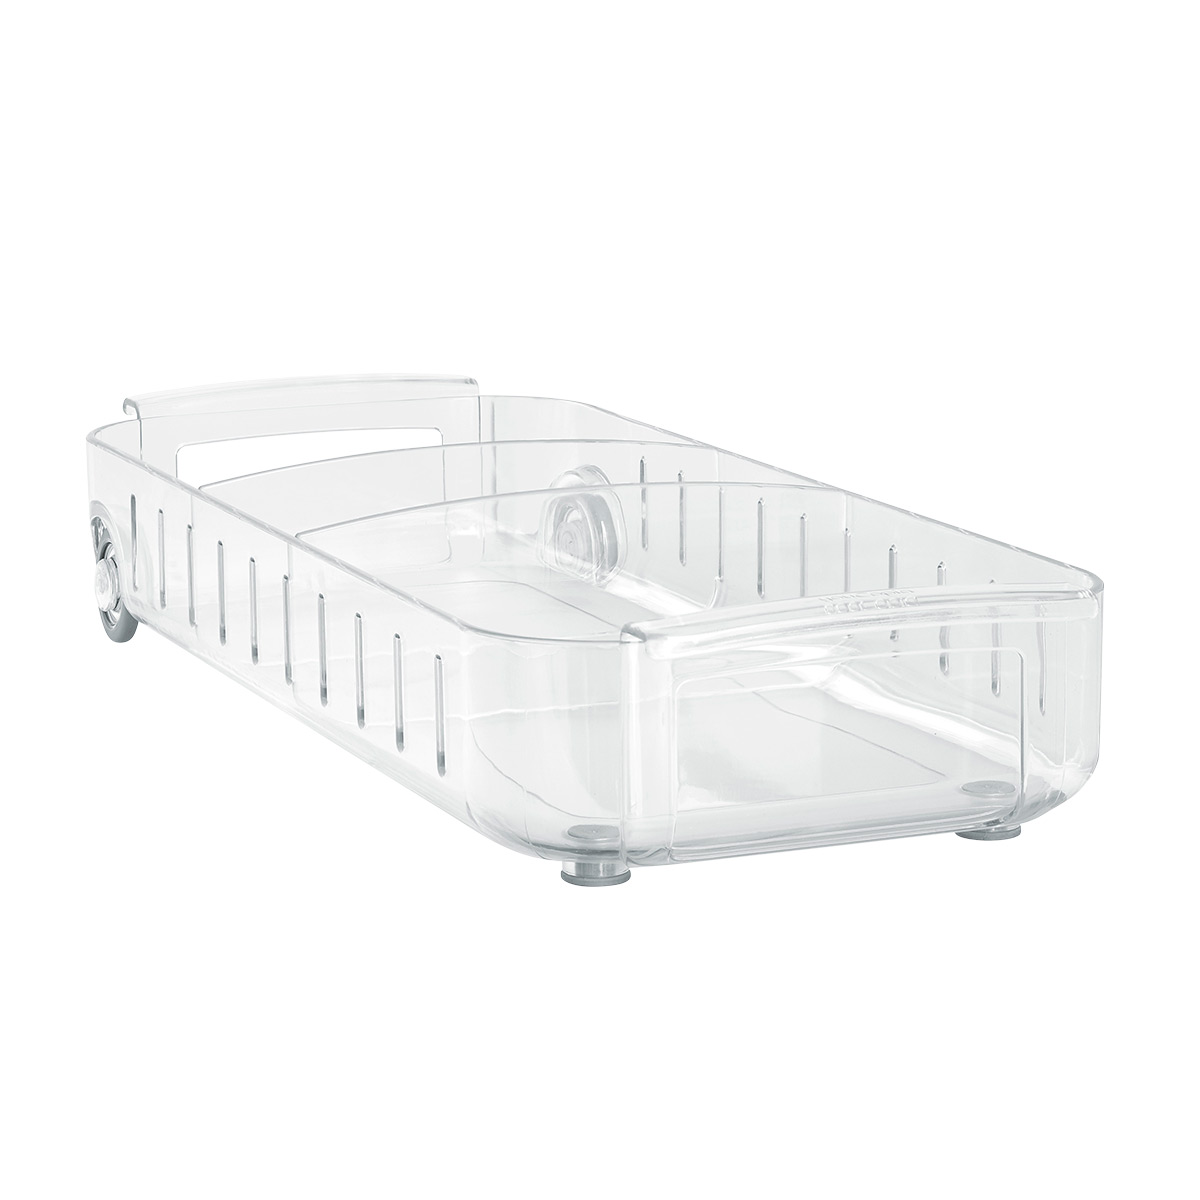 https://www.containerstore.com/catalogimages/482825/10093858_01_RollOut-Fridge-6in-Caddy.jpg